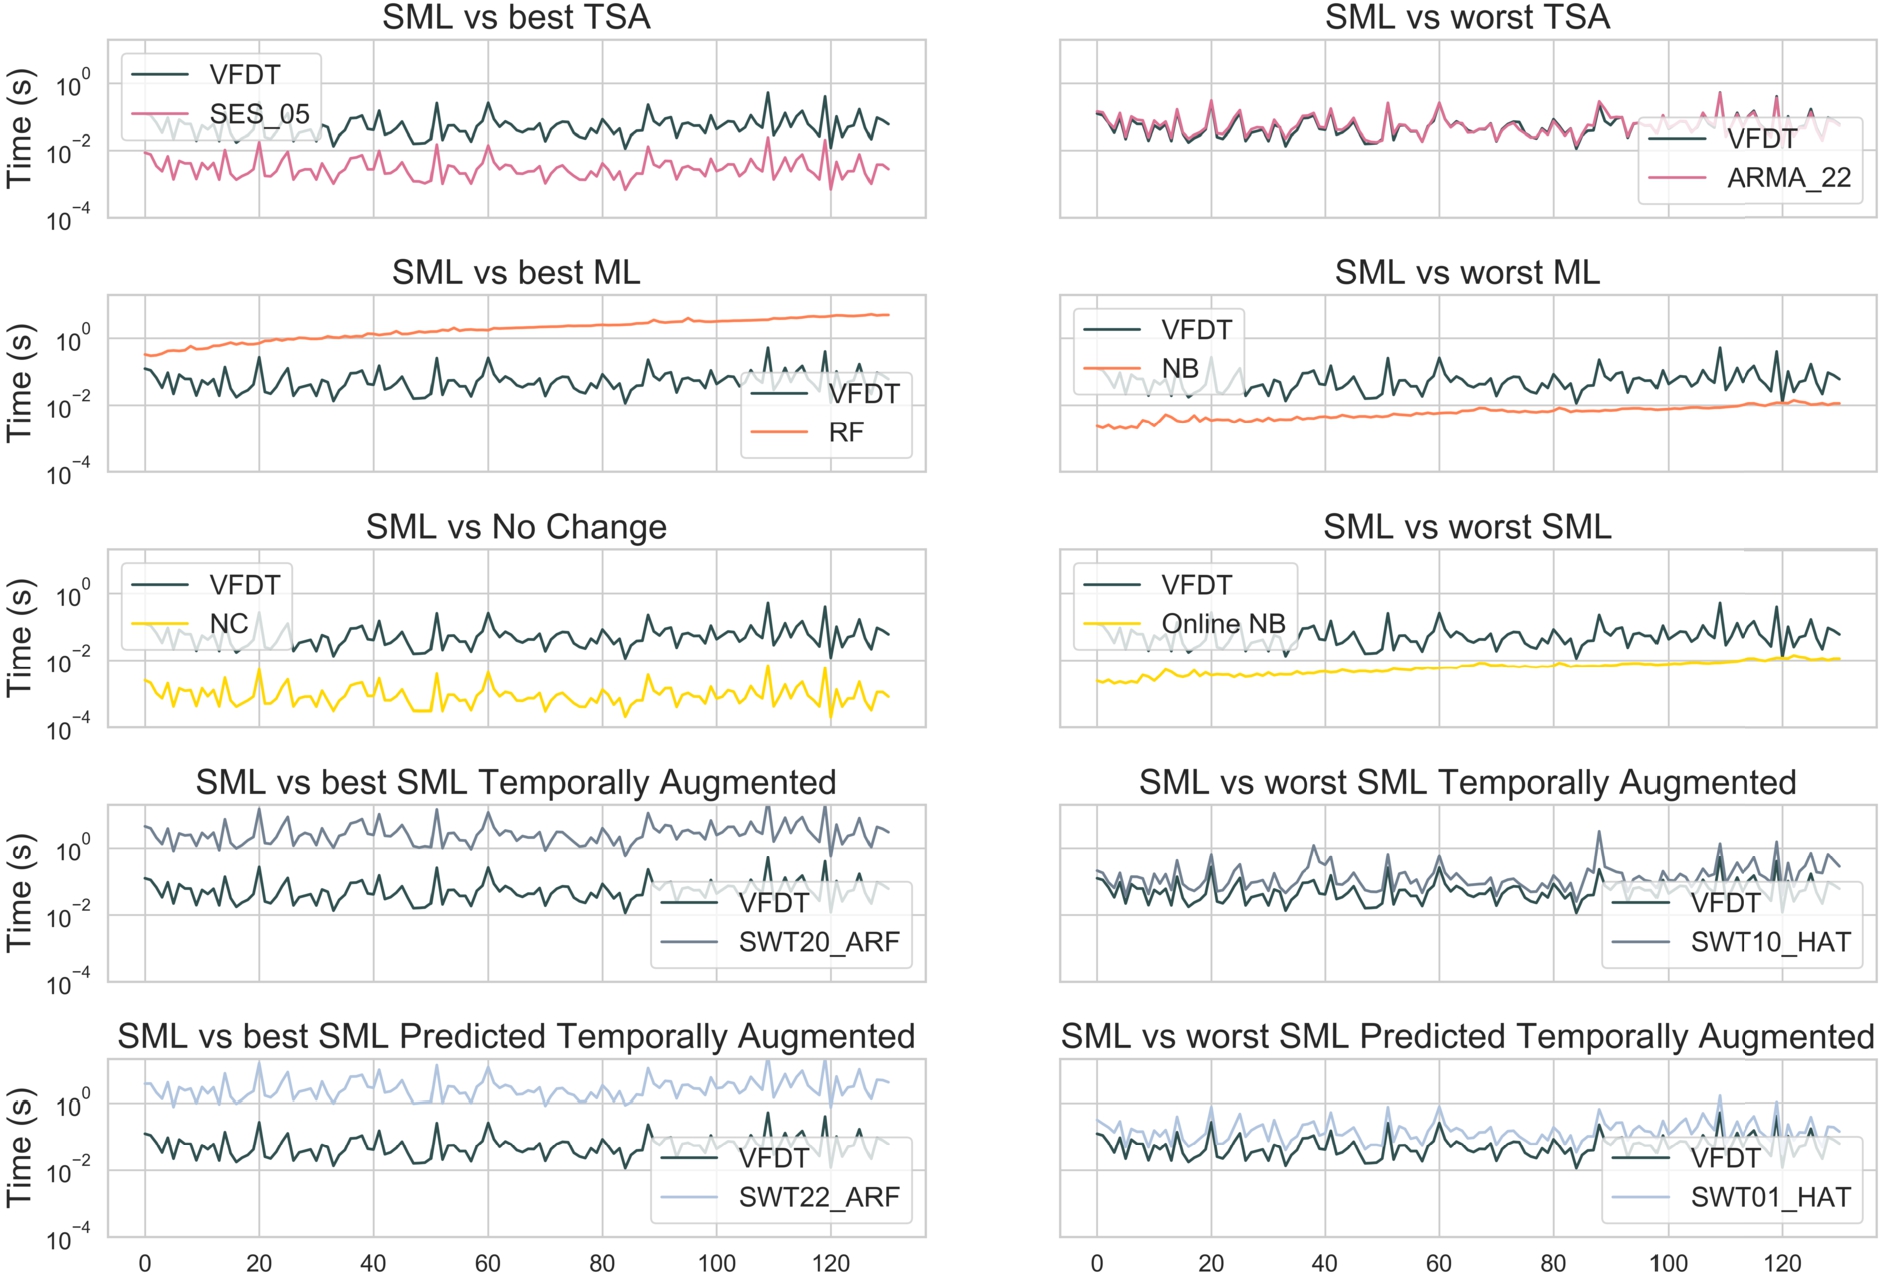 Time results achieved over all the segments. The first column compares the best TSA, ML, No Change, SML Temporally Augmented, and SML Predicted Temporally Augmented models w.r.t. the best SML model (VFDT classifier), while the second column compares the worst TSA, ML, SML, SML Temporally Augmented, and SML Predicted Temporally Augmented models w.r.t. the best SML model.